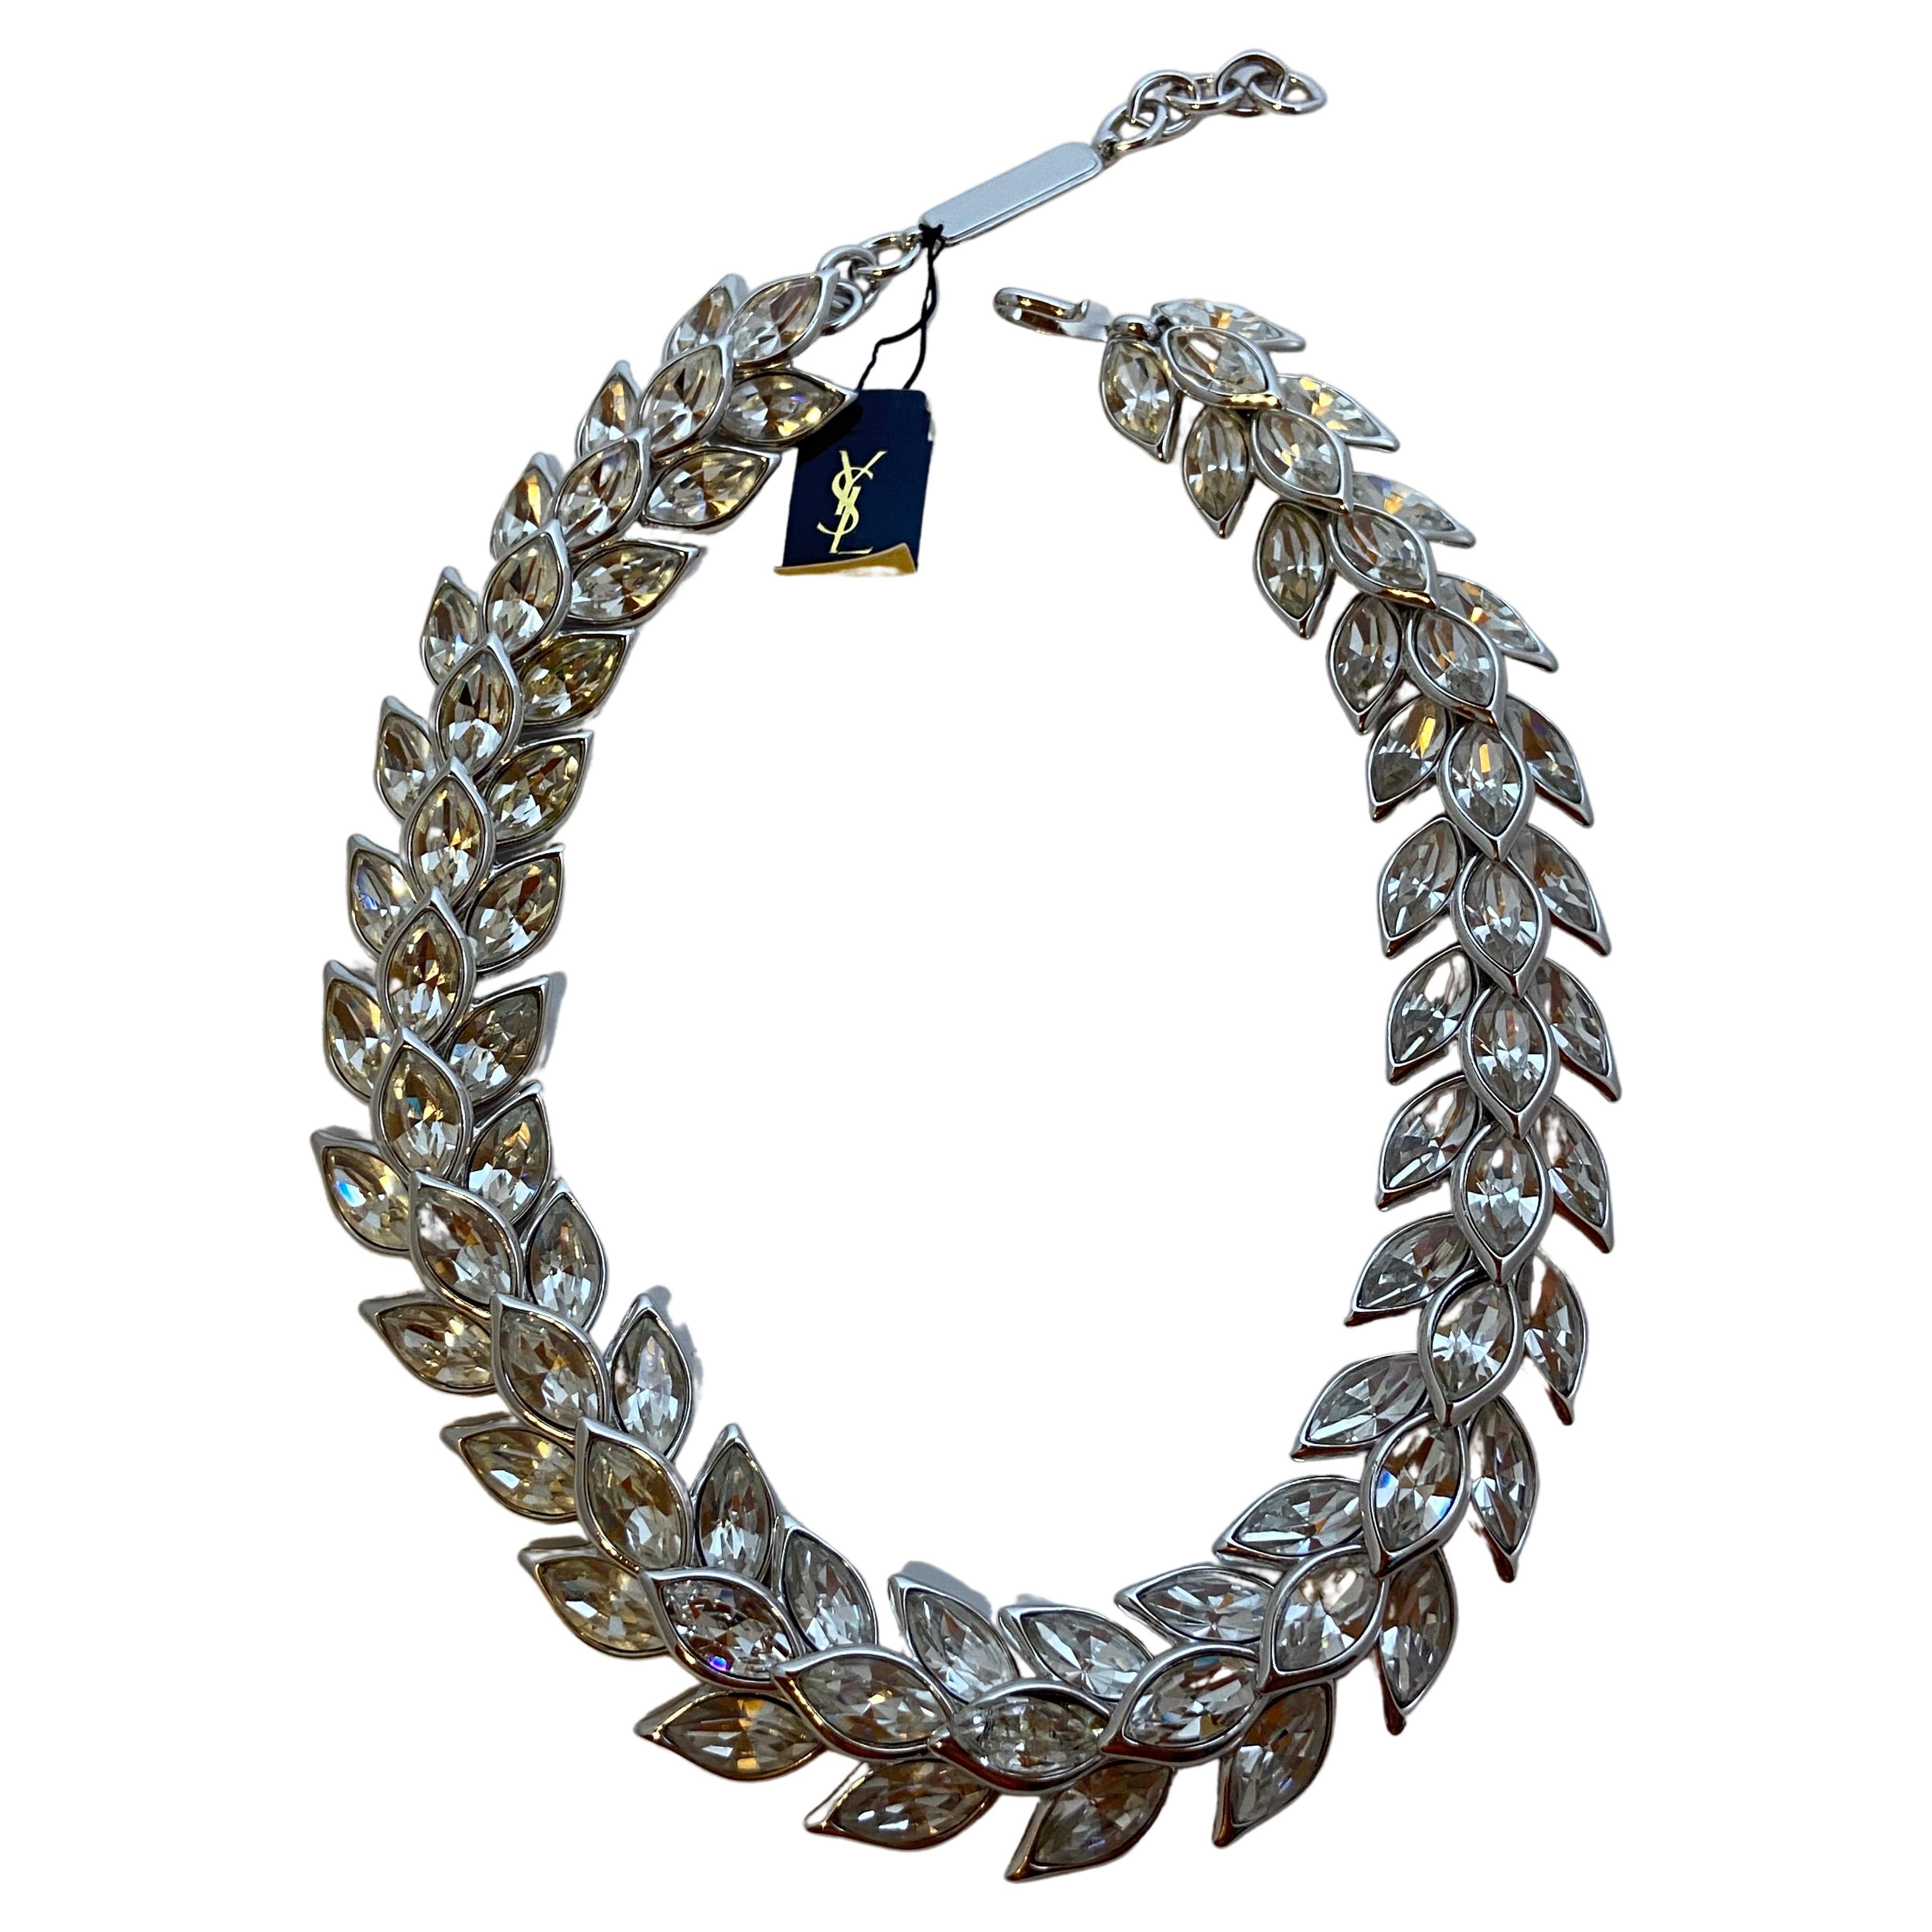 Yves Saint Laurent "Limited Edition" Magnificent "Multi Leaves" Crystal Necklace For Sale